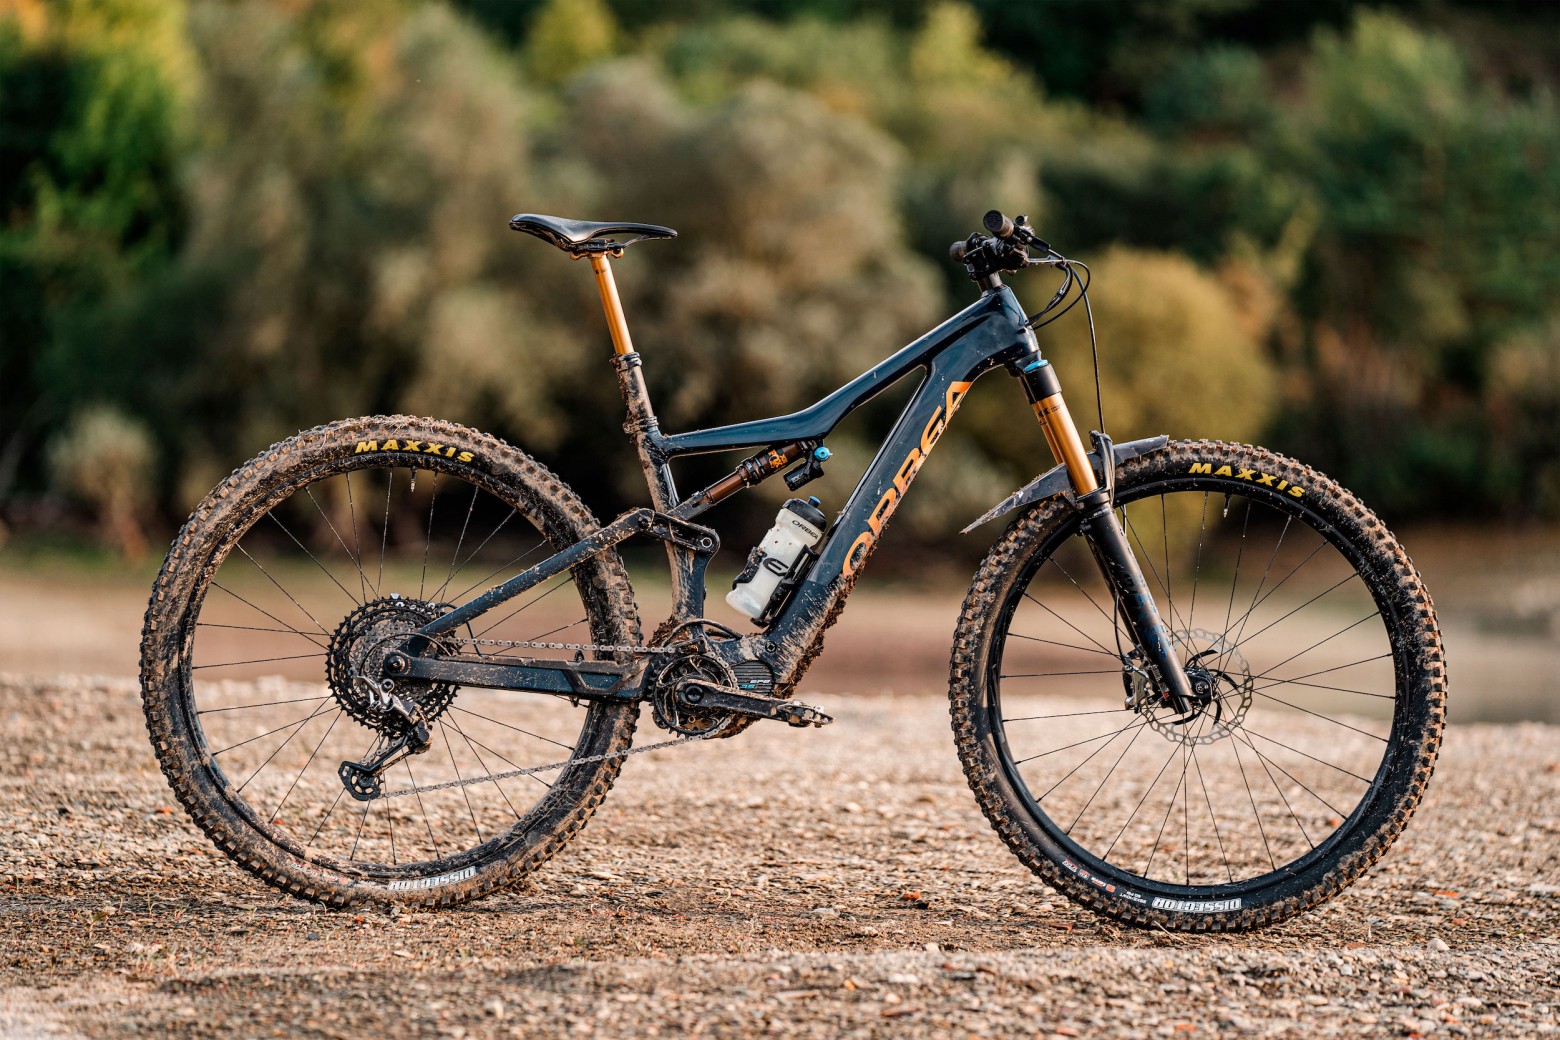 Orbea is revolutionizing eMTB with the new Rise less "e" means more "MTB"